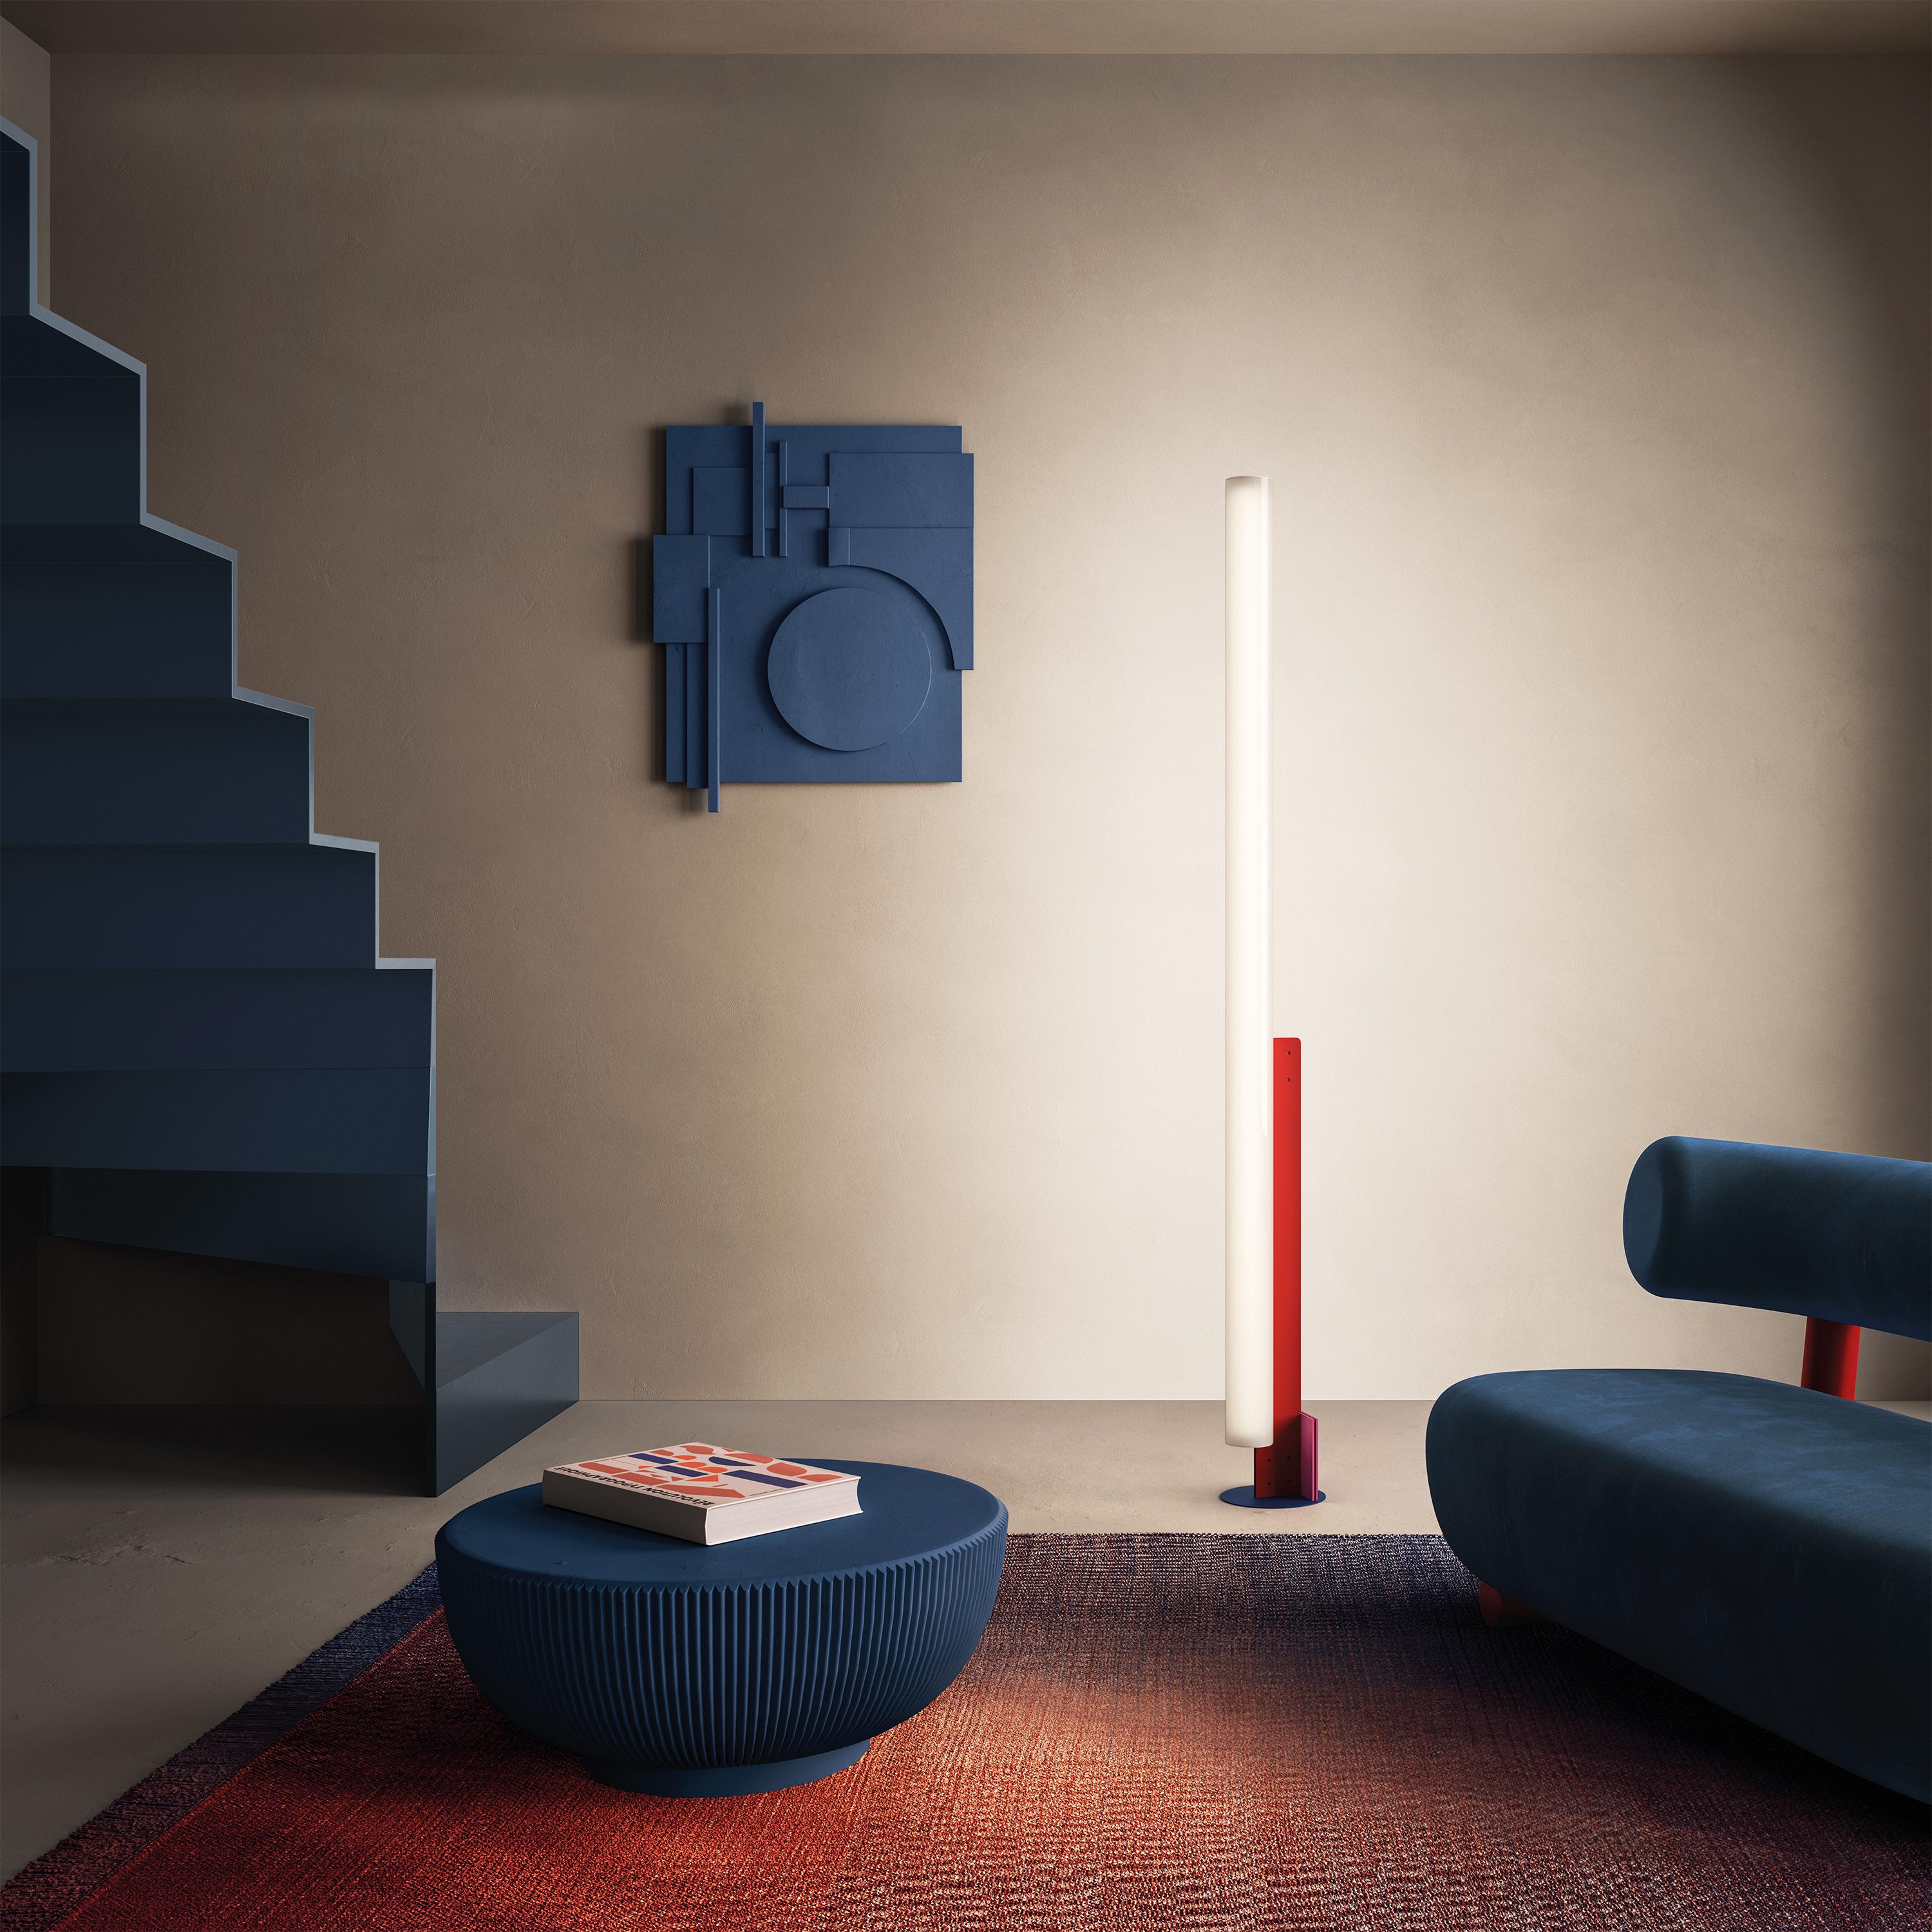 The De Stijl artistic movement inspires with its linear and simple forms. And precisely, the two-dimensional geometric shapes such as the square and the rectangle act as a counterweight to the tubular and three dimensional light of Model T, the